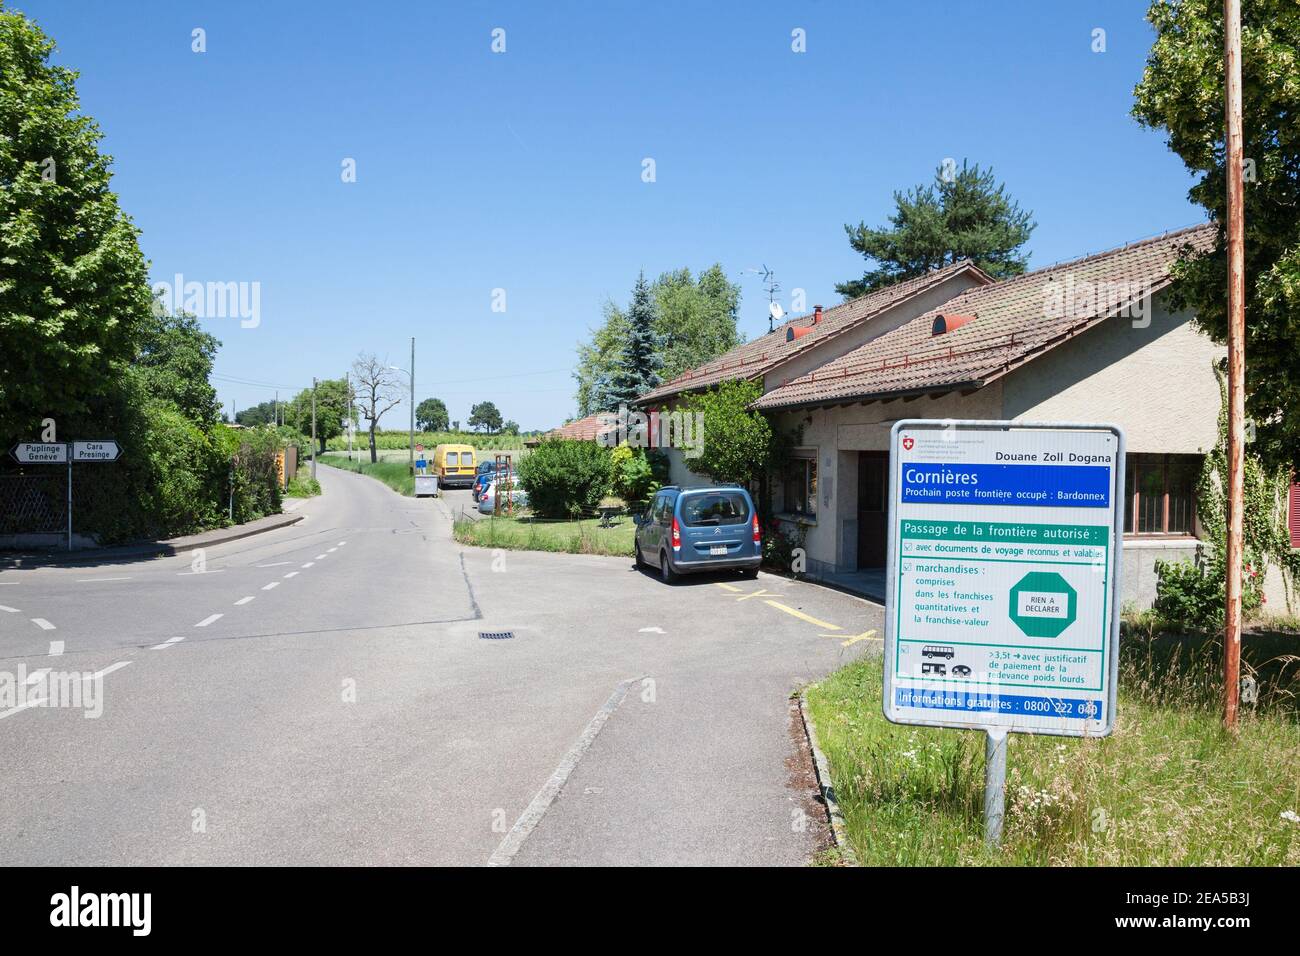 CORNIERES, SWITZERLAND - JUNE 18, 2017: Douanes Building of Cornieres, at border of Switerland with France, abandoned border crossing, closed since Sw Stock Photo